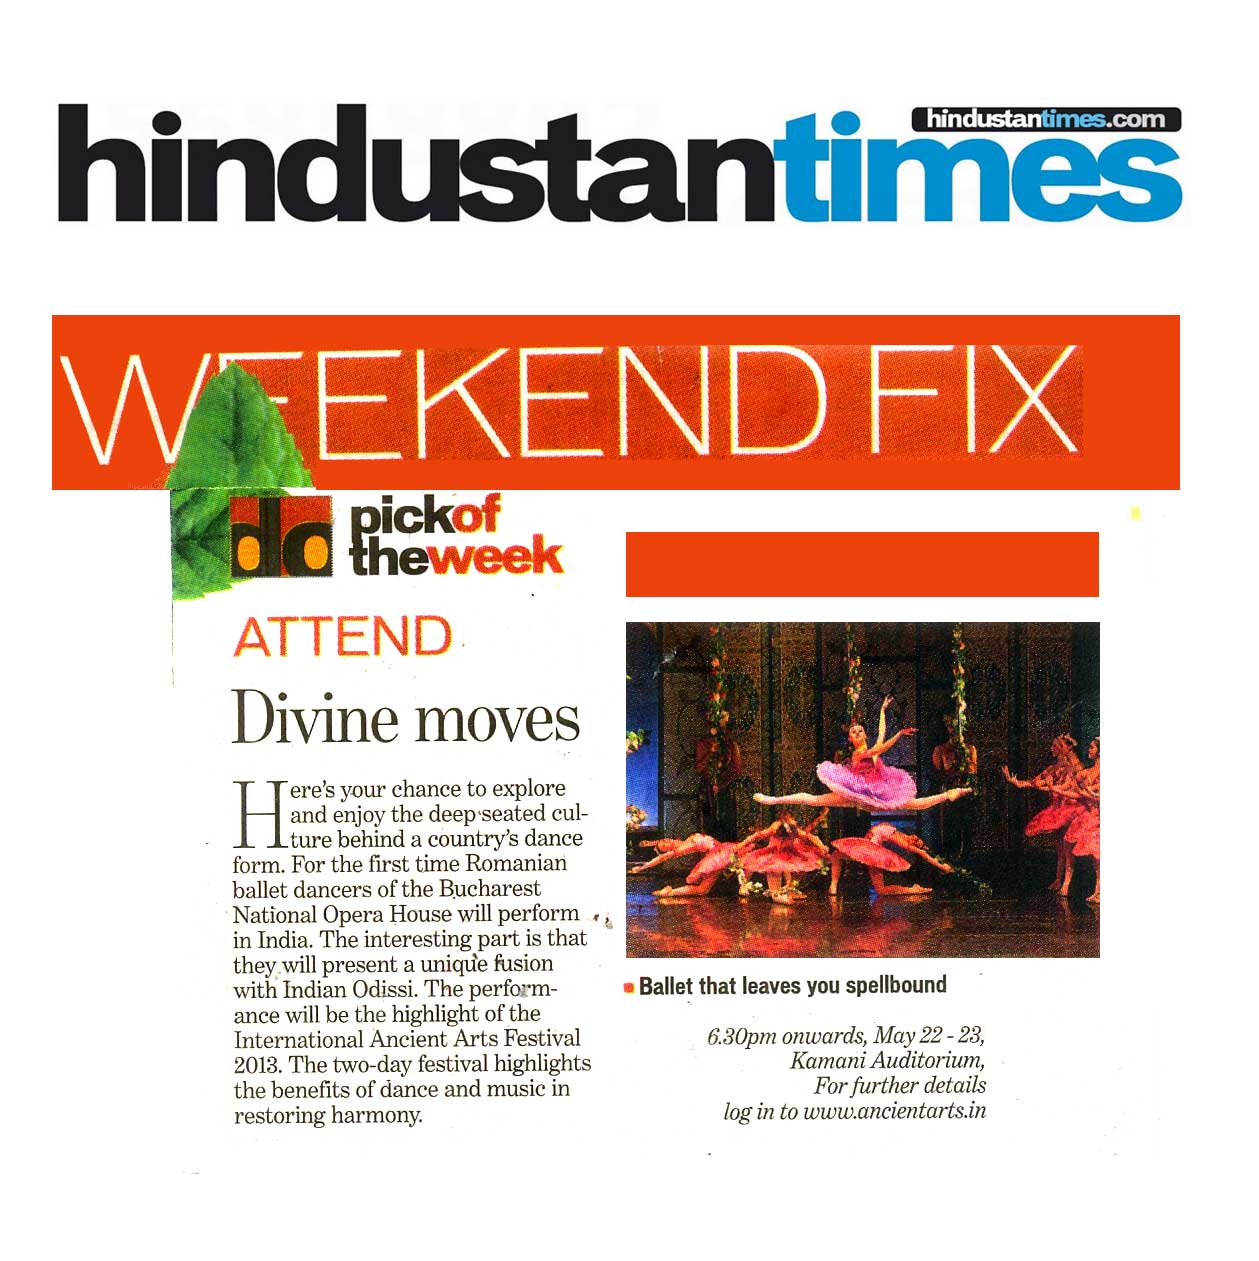 2013, May 18: Divine Moves, Hindustan Times.